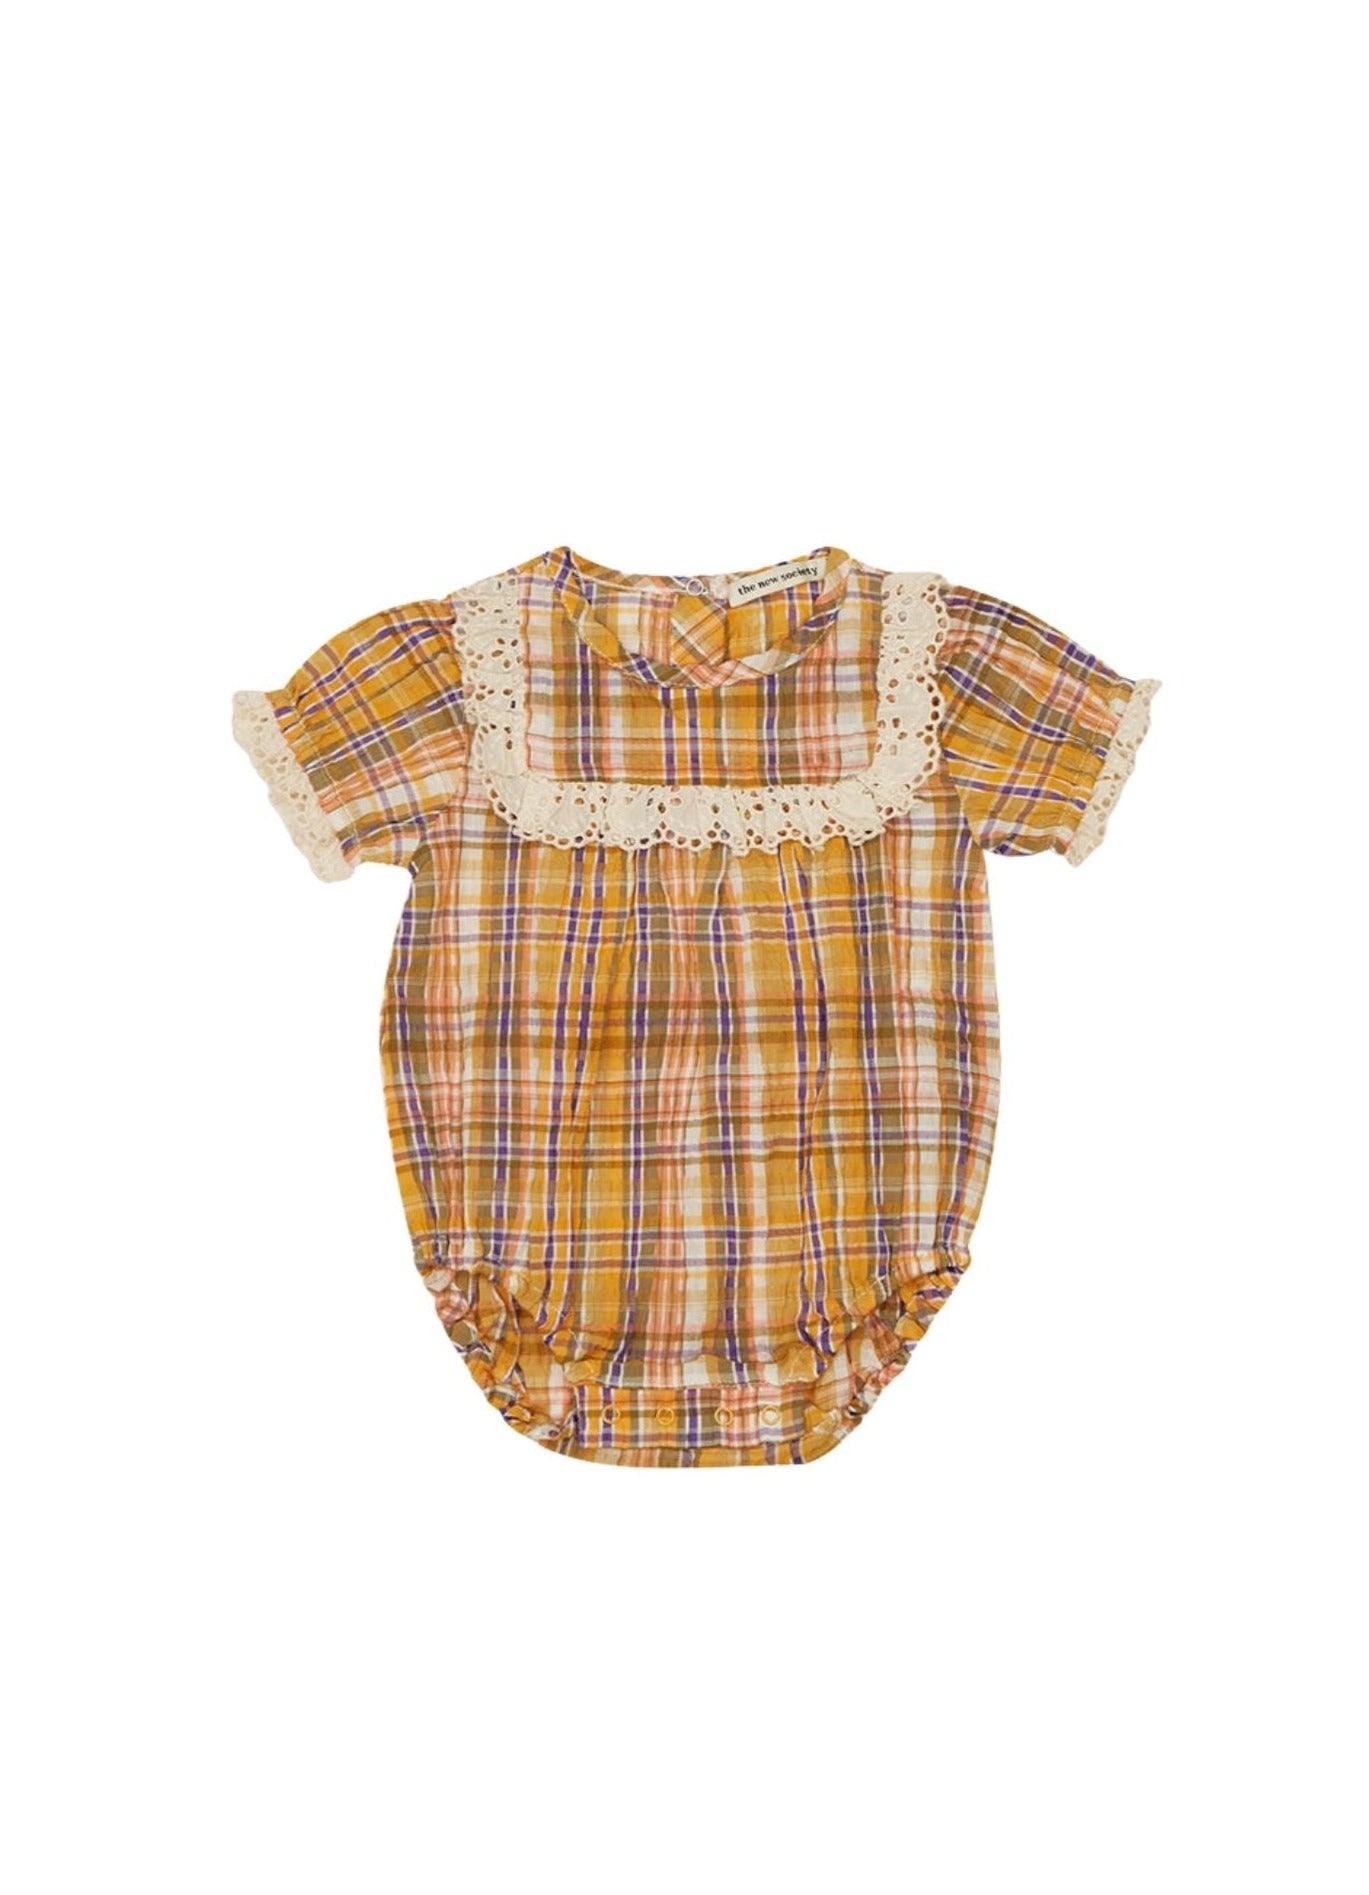 Andrea Baby Romper Baby Grows The New Society 